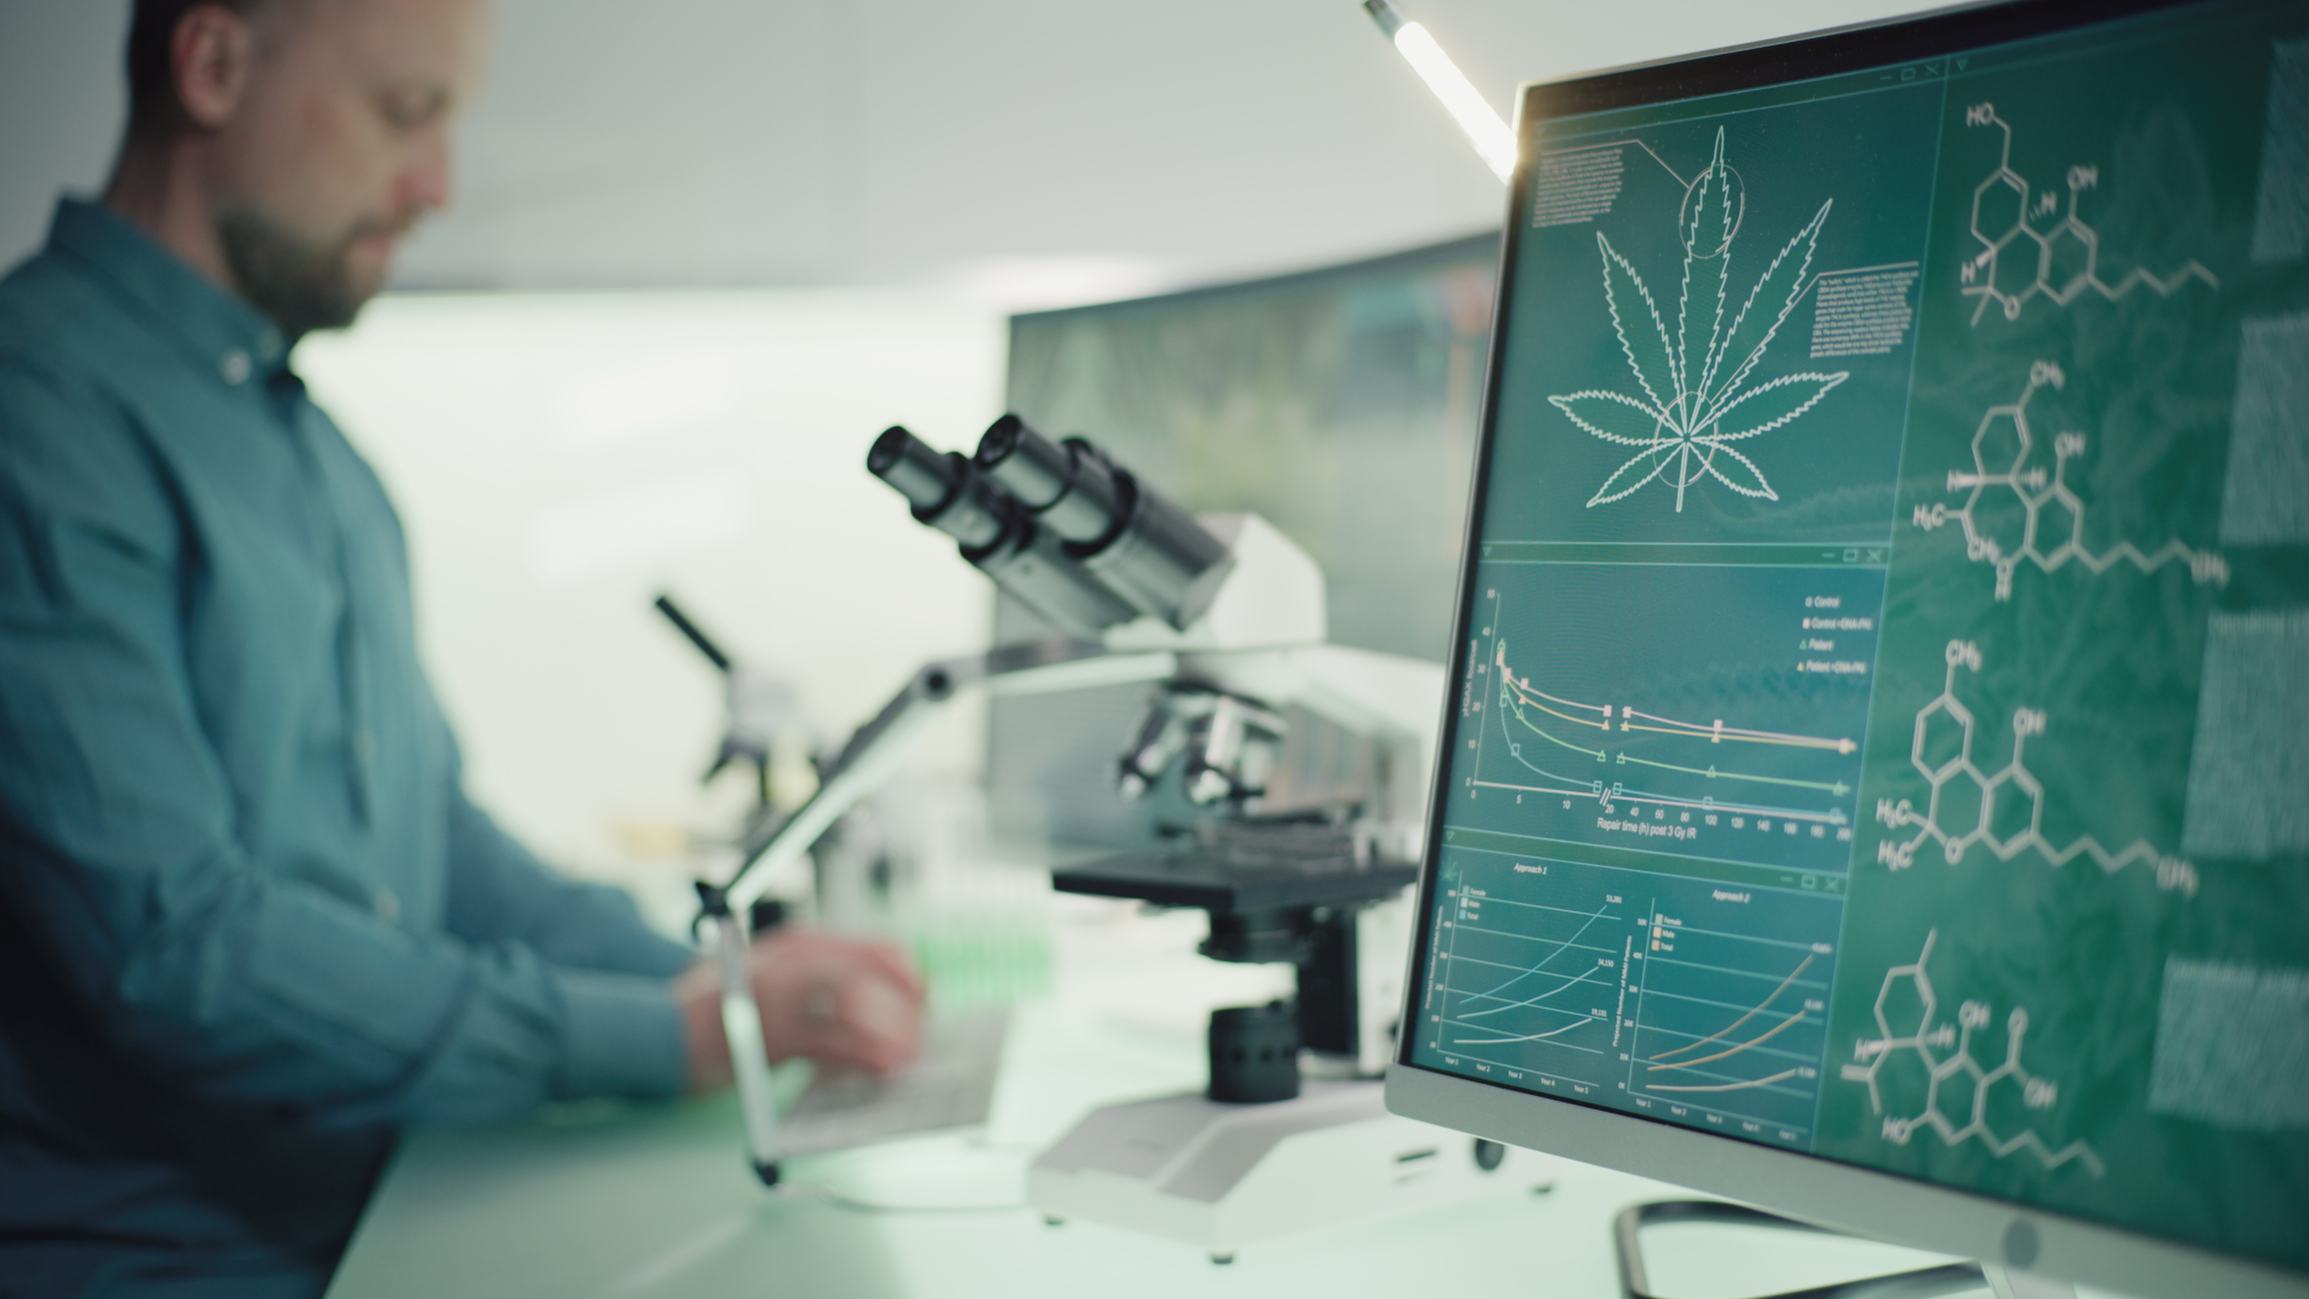 Lab technician working at desk, with microscope and computer monitor to his right side. The monitor screen displays cannabis plant data.